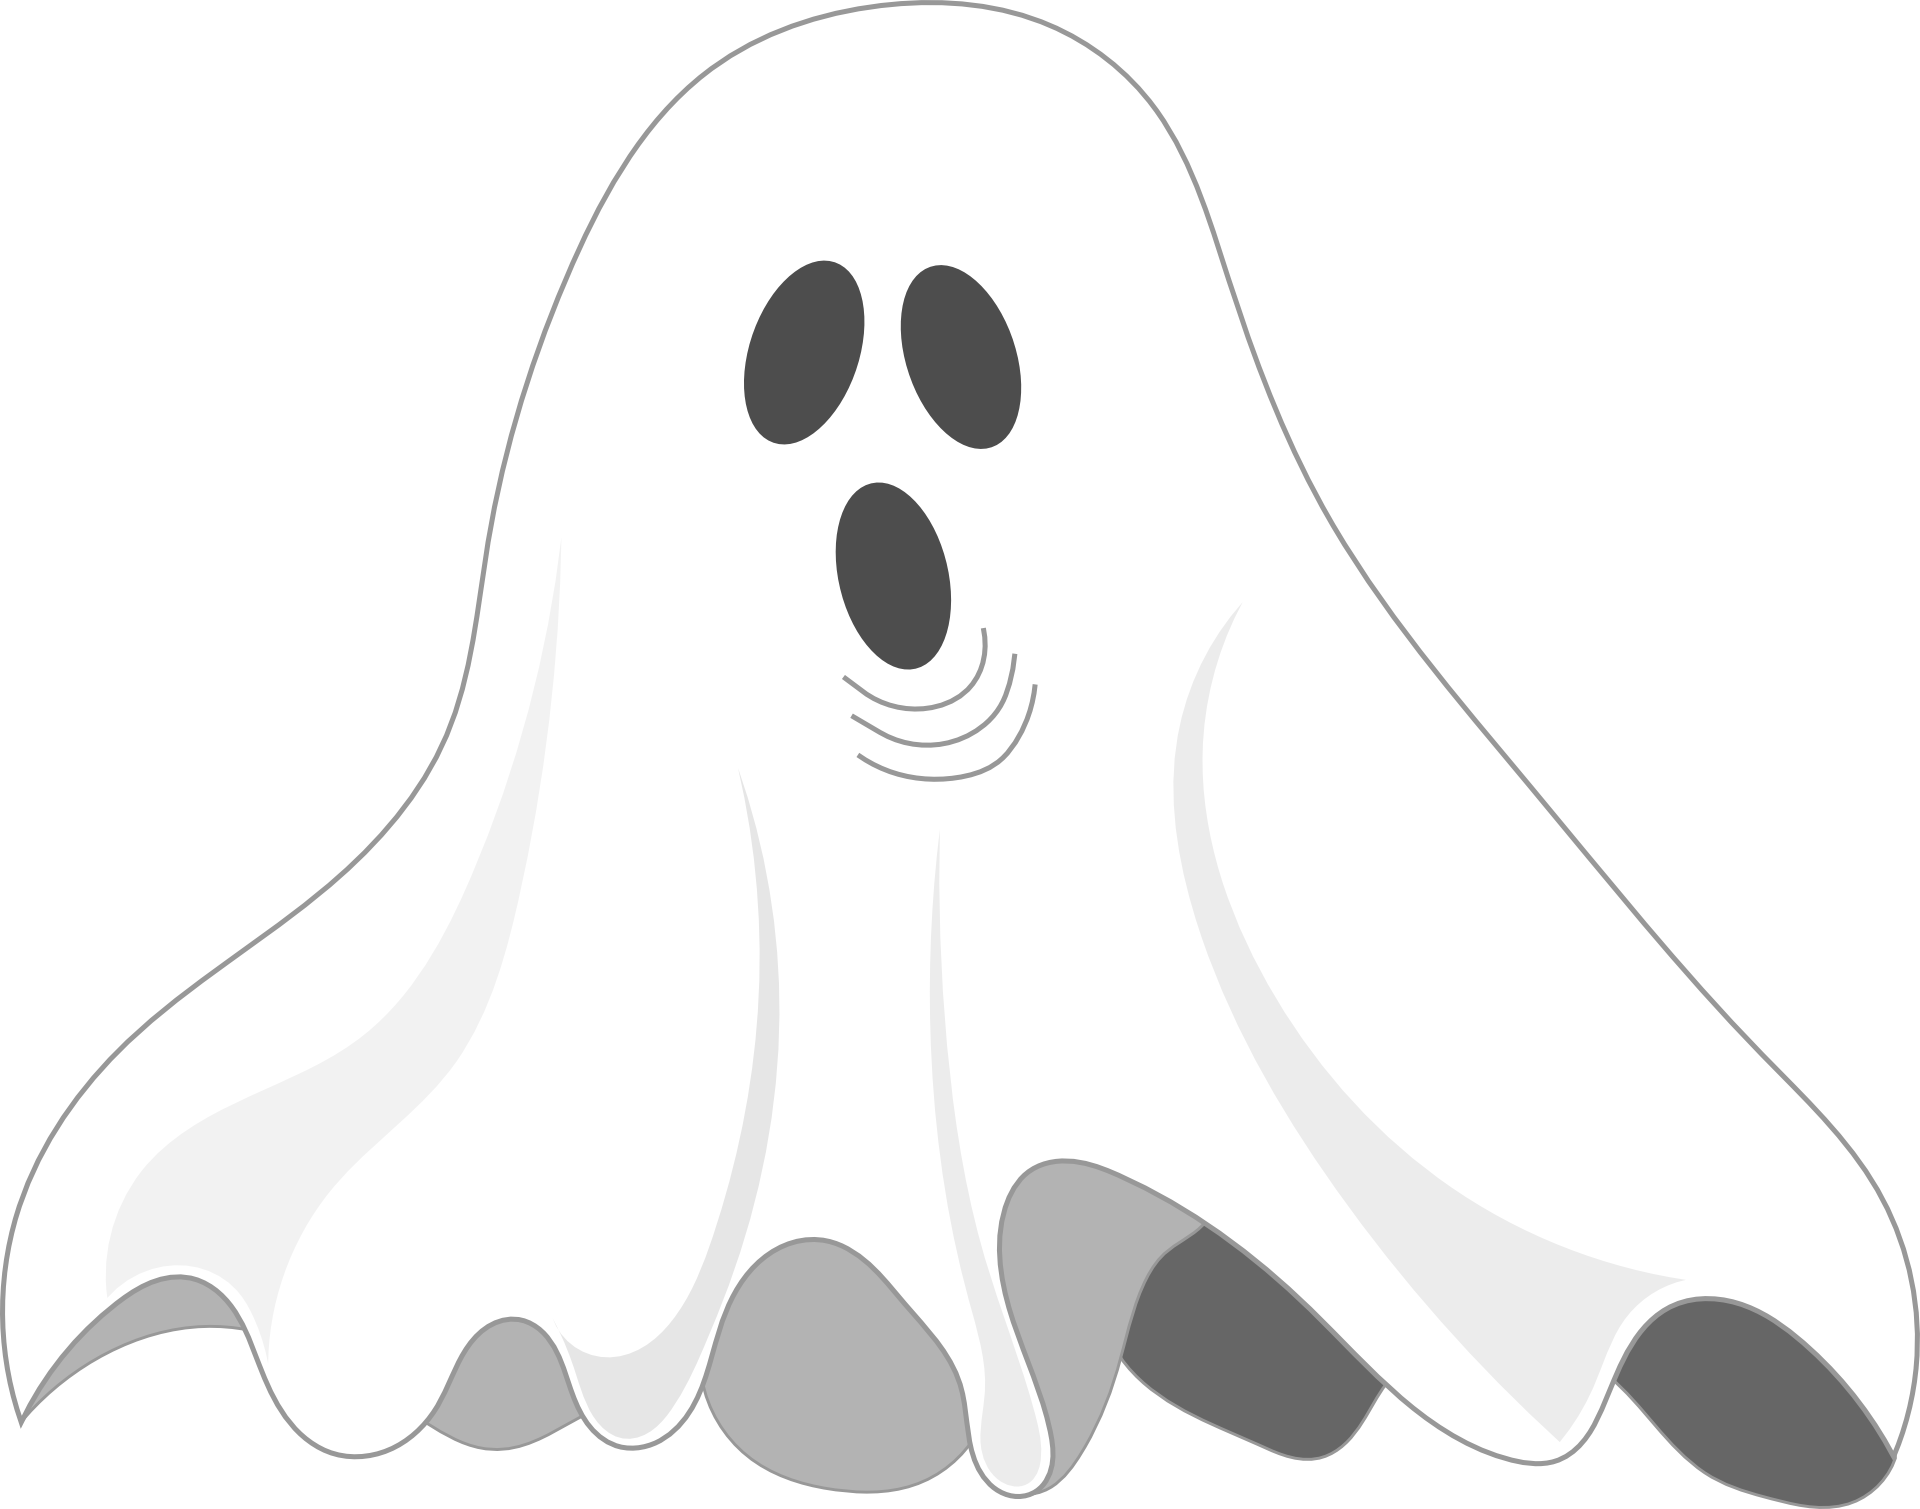 Ghost Png : Download the ghost, fantasy png on freepngimg for free. 